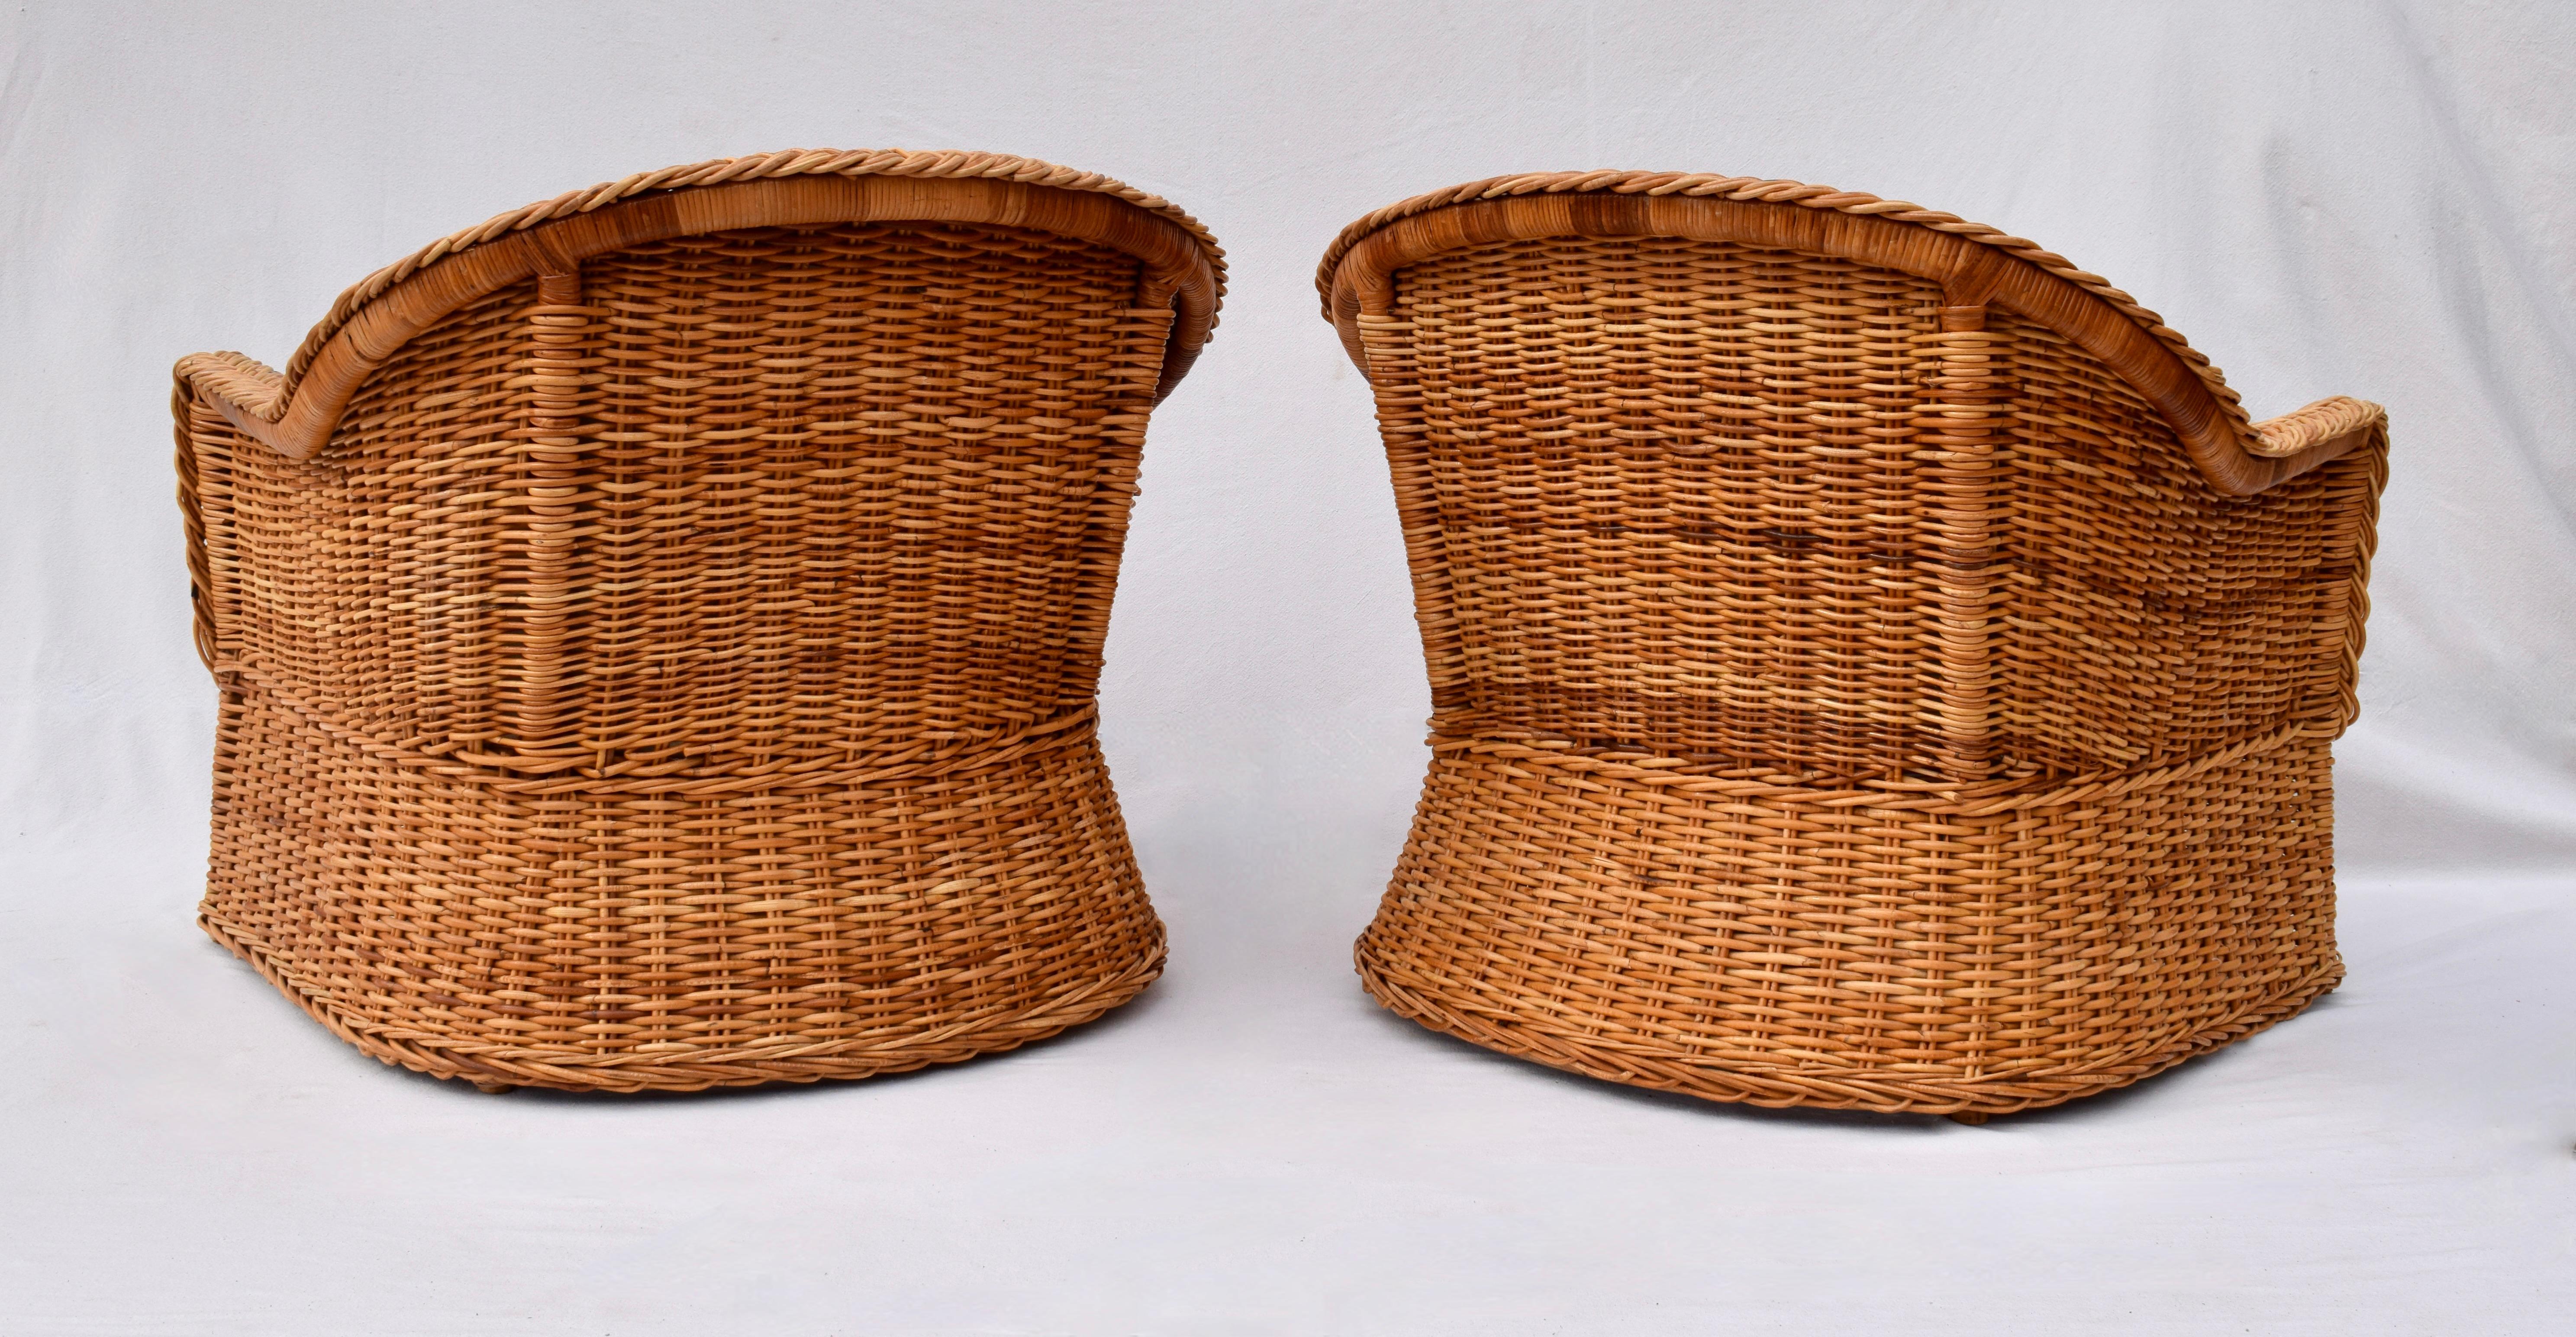 Woven 1980's Wicker Works Braided Rattan Club Chairs, Pair For Sale